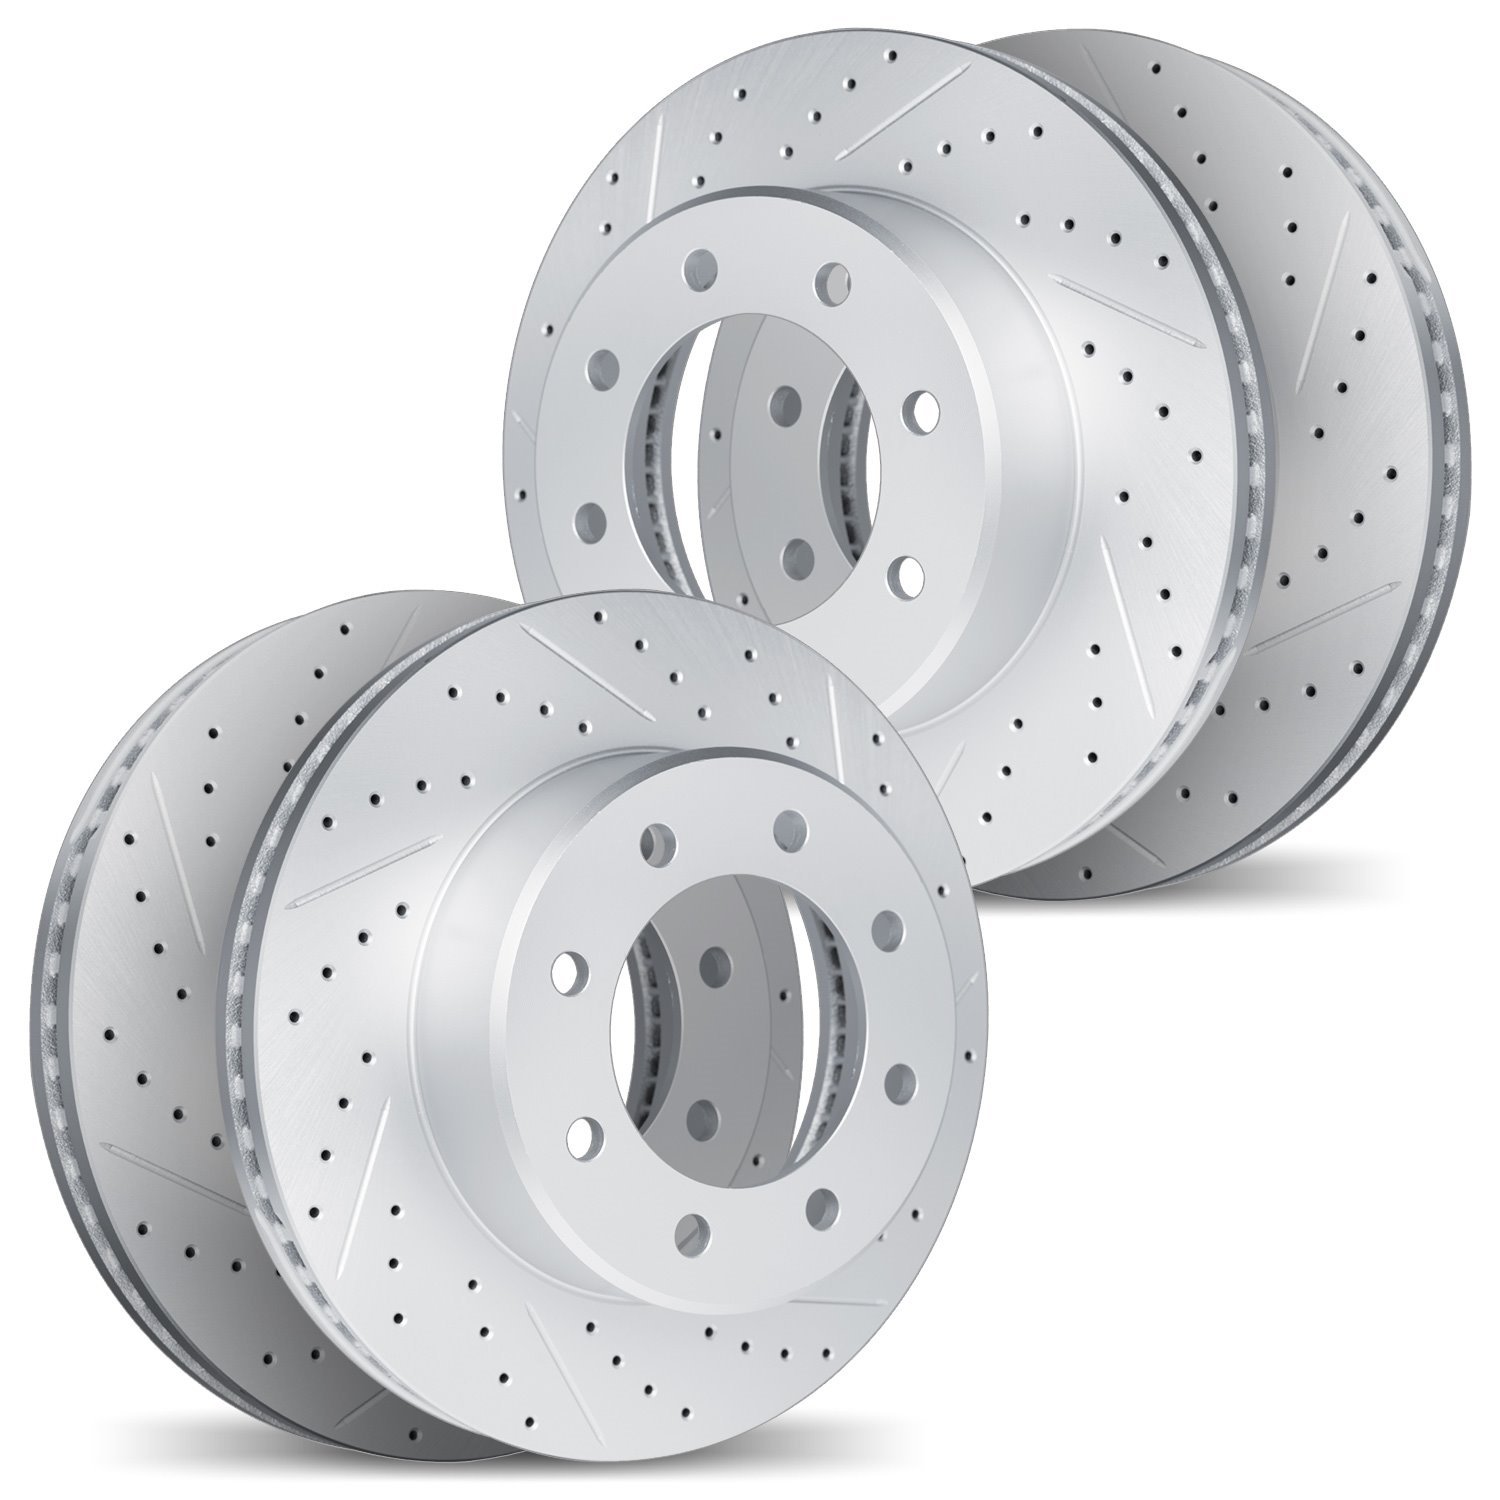 2004-54119 Geoperformance Drilled/Slotted Brake Rotors, 2006-2010 Ford/Lincoln/Mercury/Mazda, Position: Front and Rear